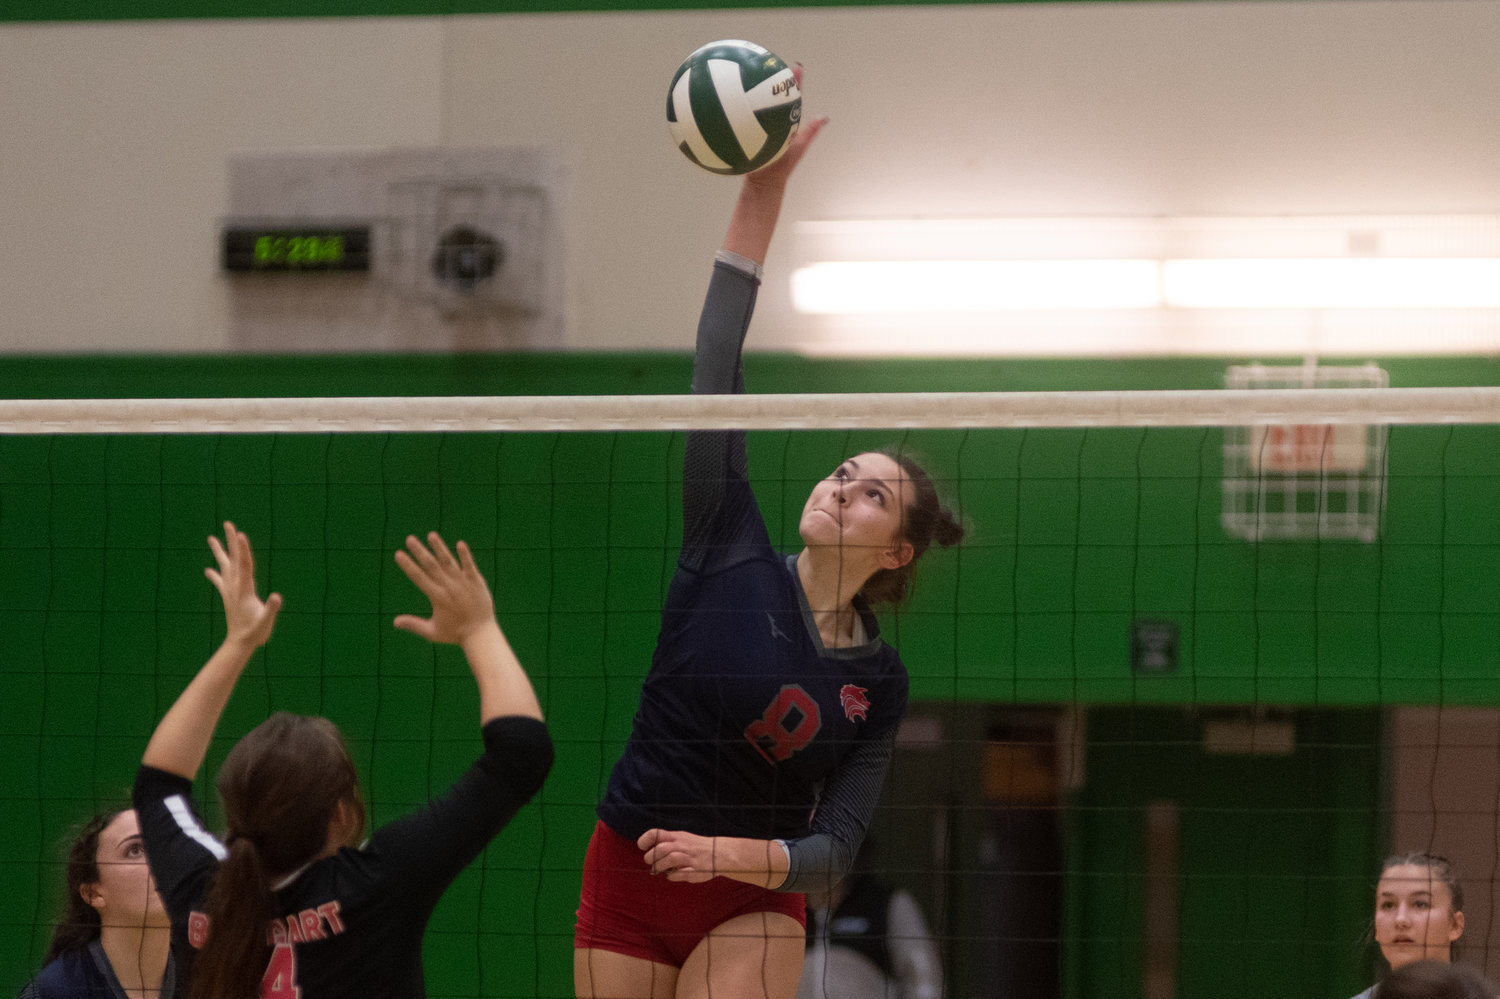 Black Hills middle Payton Childers sends a ball across the net against Shelton in a consolation matchup in the 2A District 4 tournament in Tumwater Nov. 11.